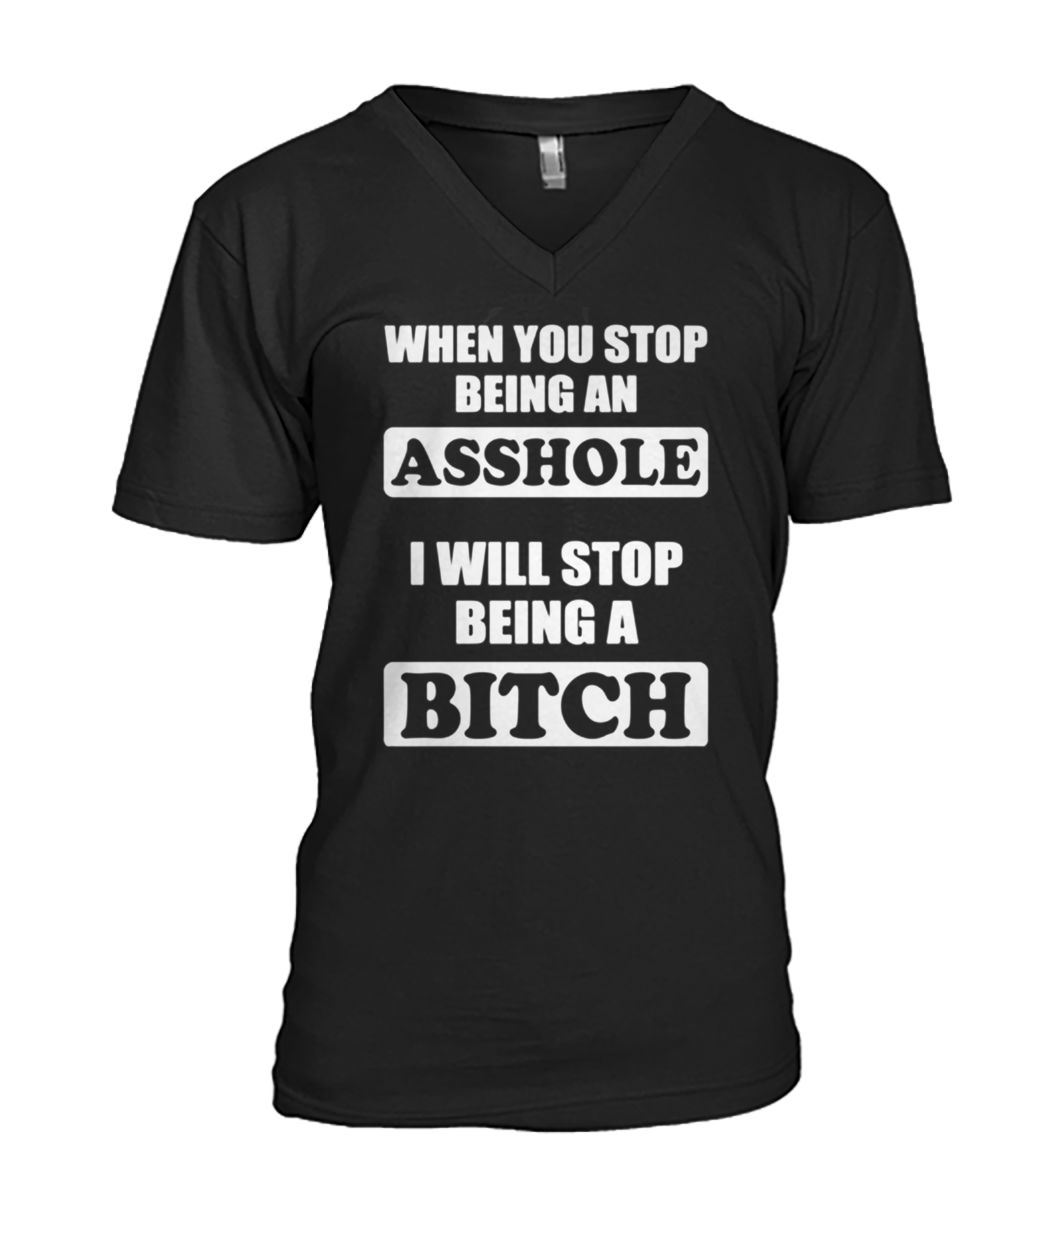 When you stop being an asshole I will stop being bitch mens v-neck